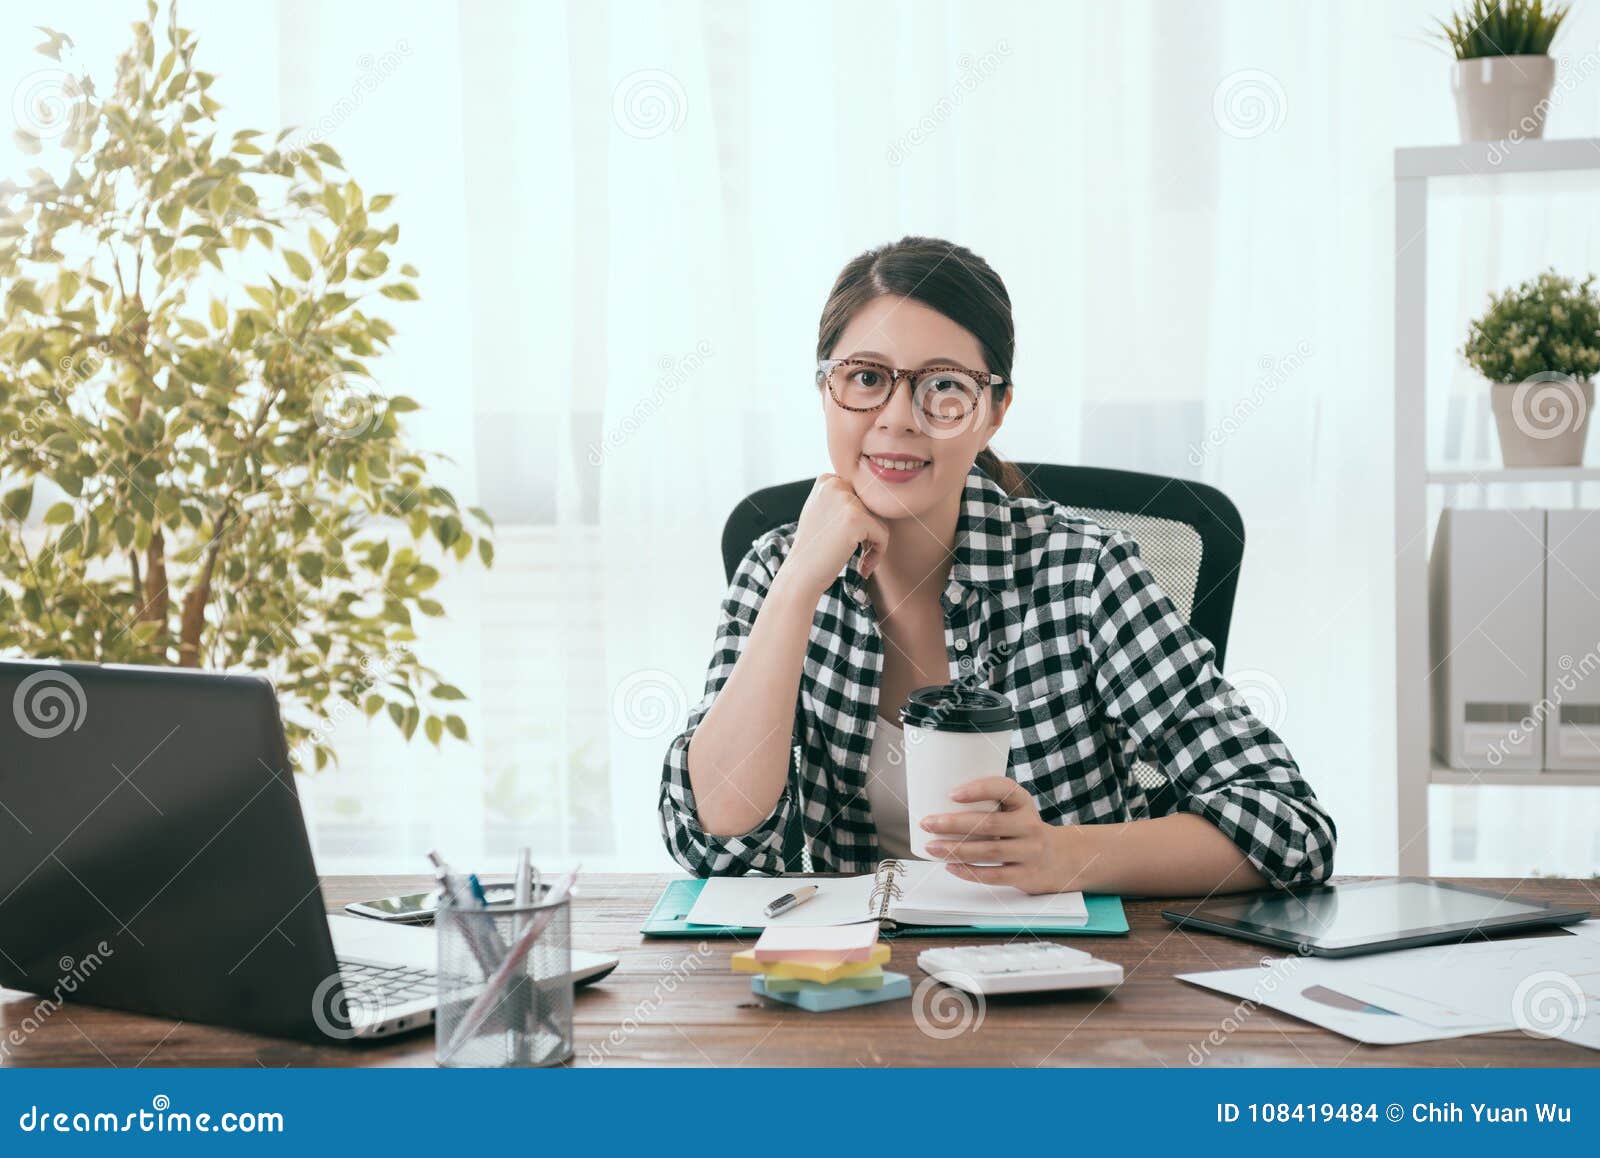 Happy Beauty Girl Office Worker Looking at Camera Stock Photo - Image ...